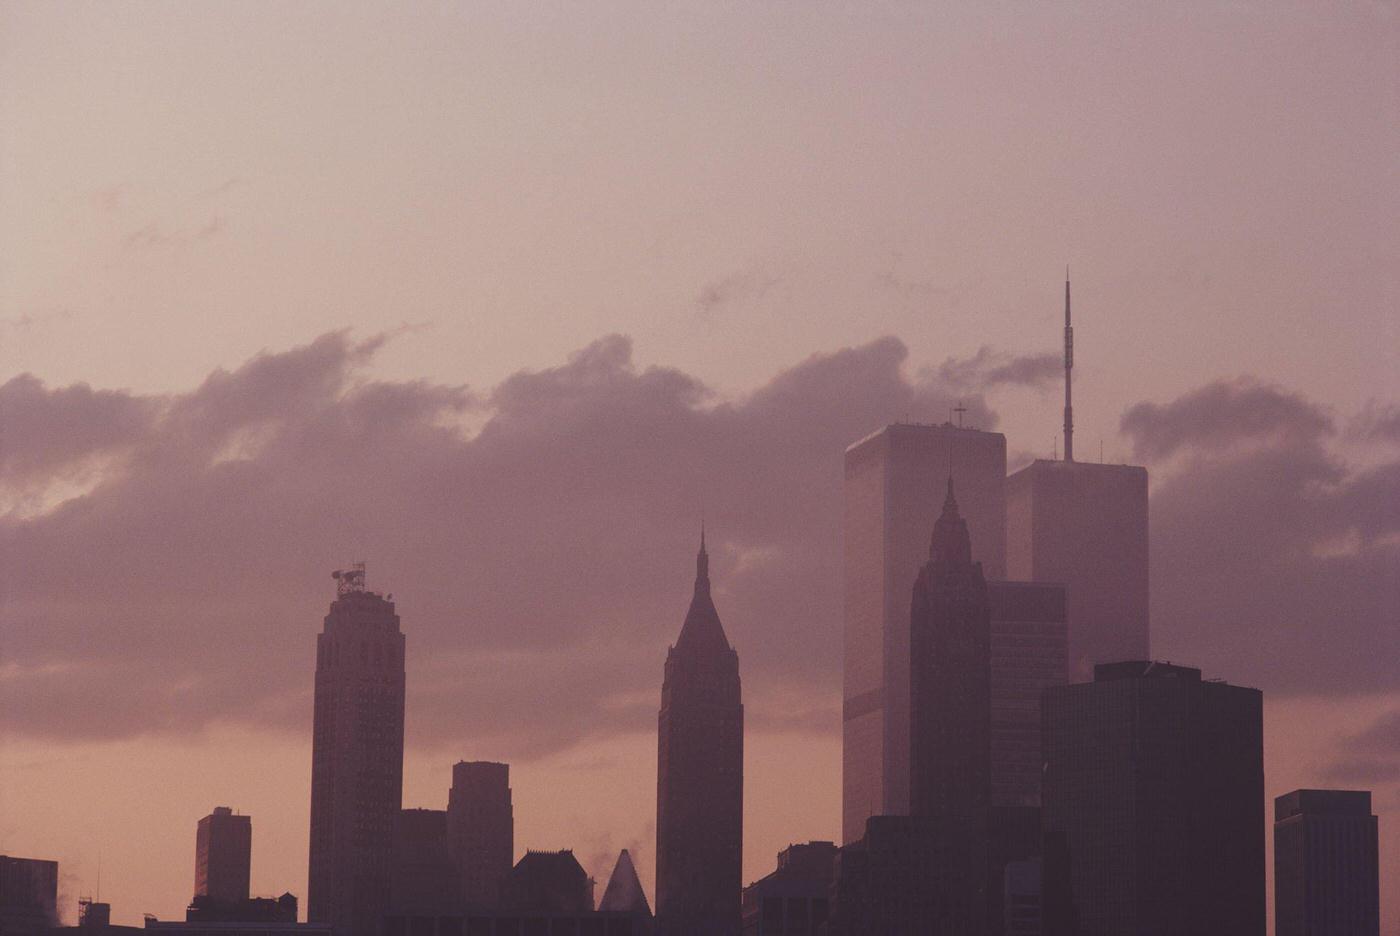 Lower Manhattan At Dusk, Showing The Twin Towers Of The World Trade Center, Manhattan, 1983